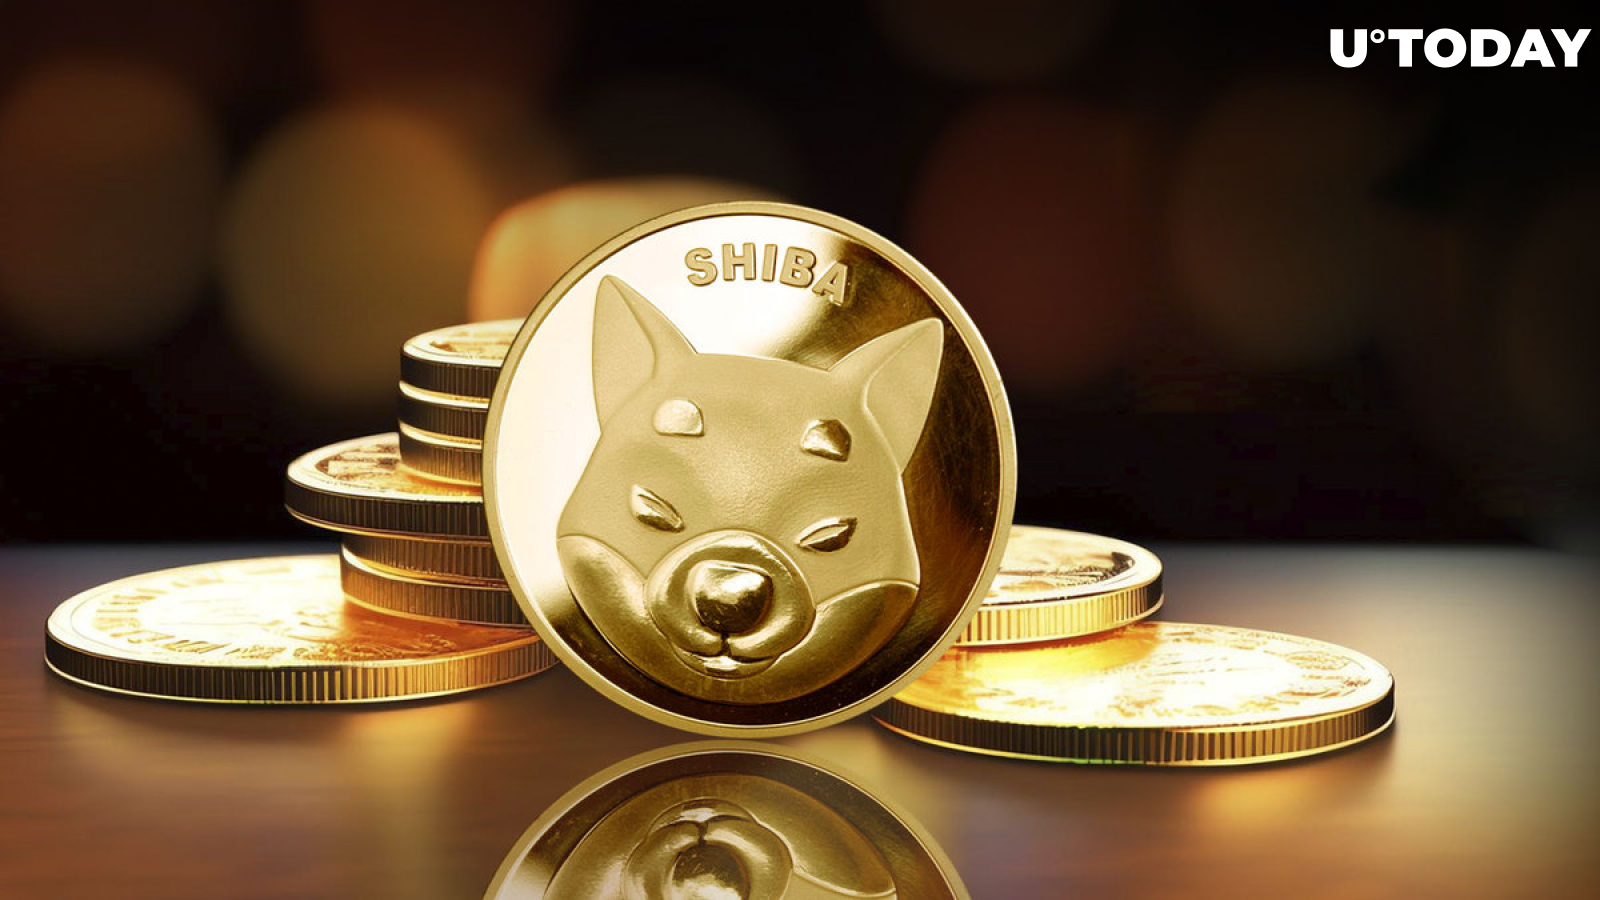 Shiba Inu Holders Can Now Pay Delivery Fee With SHIB